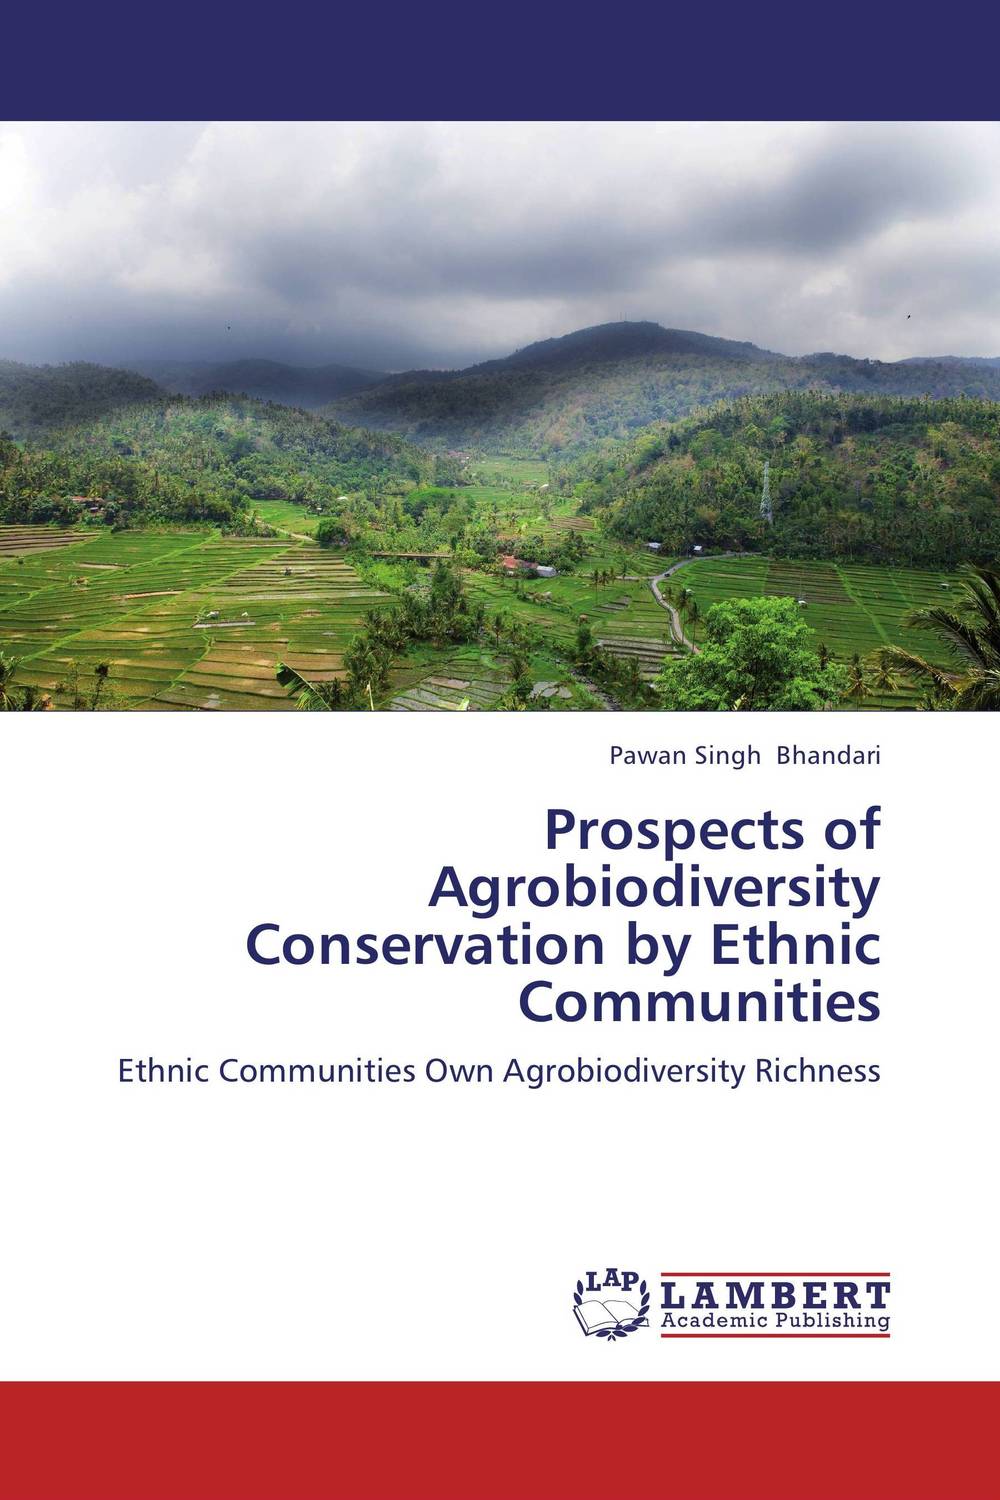 Prospects of Agrobiodiversity Conservation by Ethnic Communities